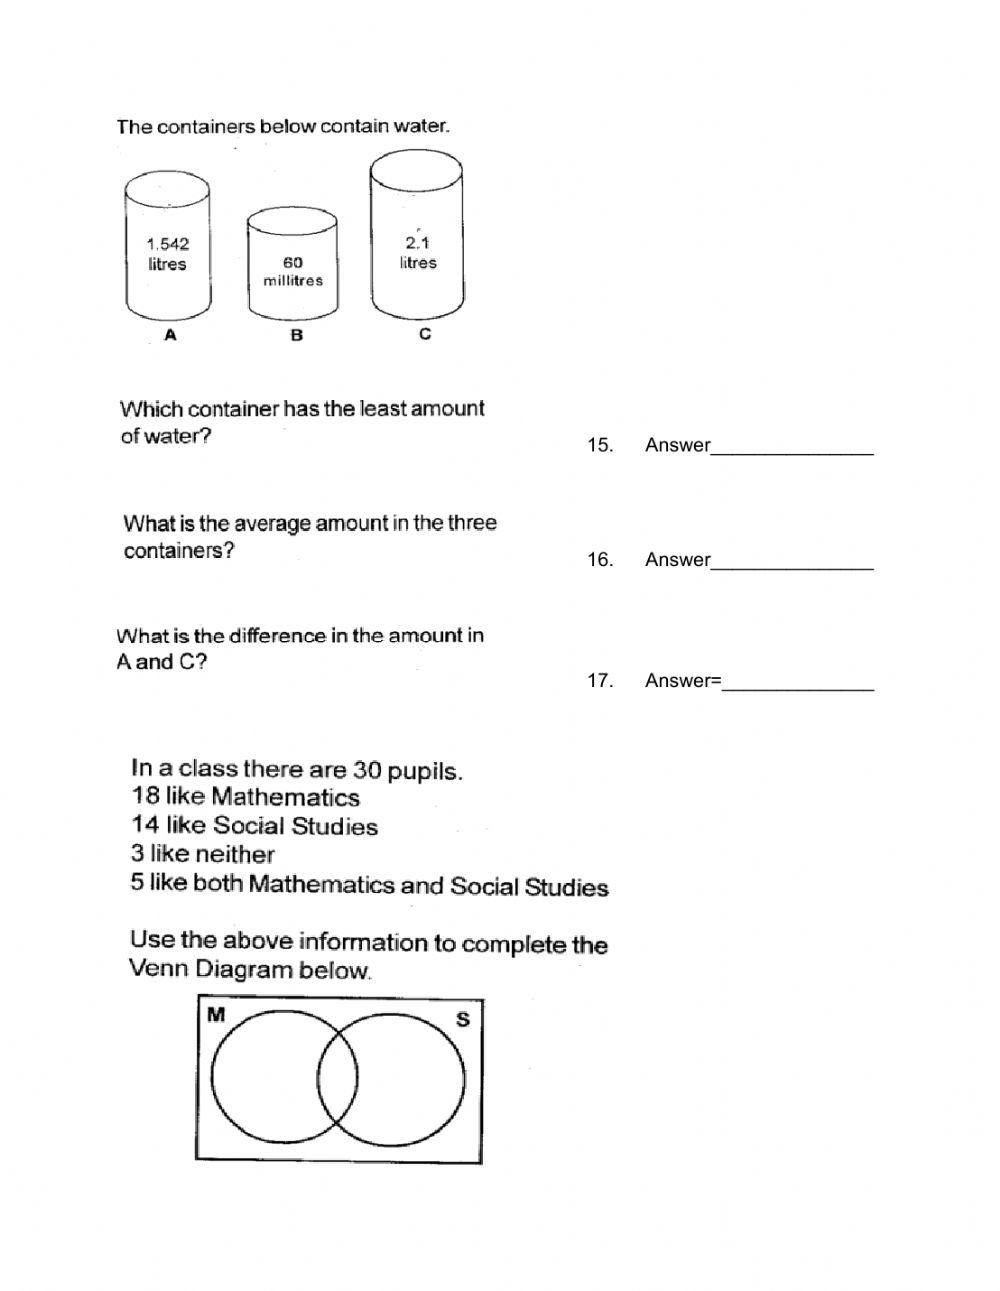 Class 4 Review Questions